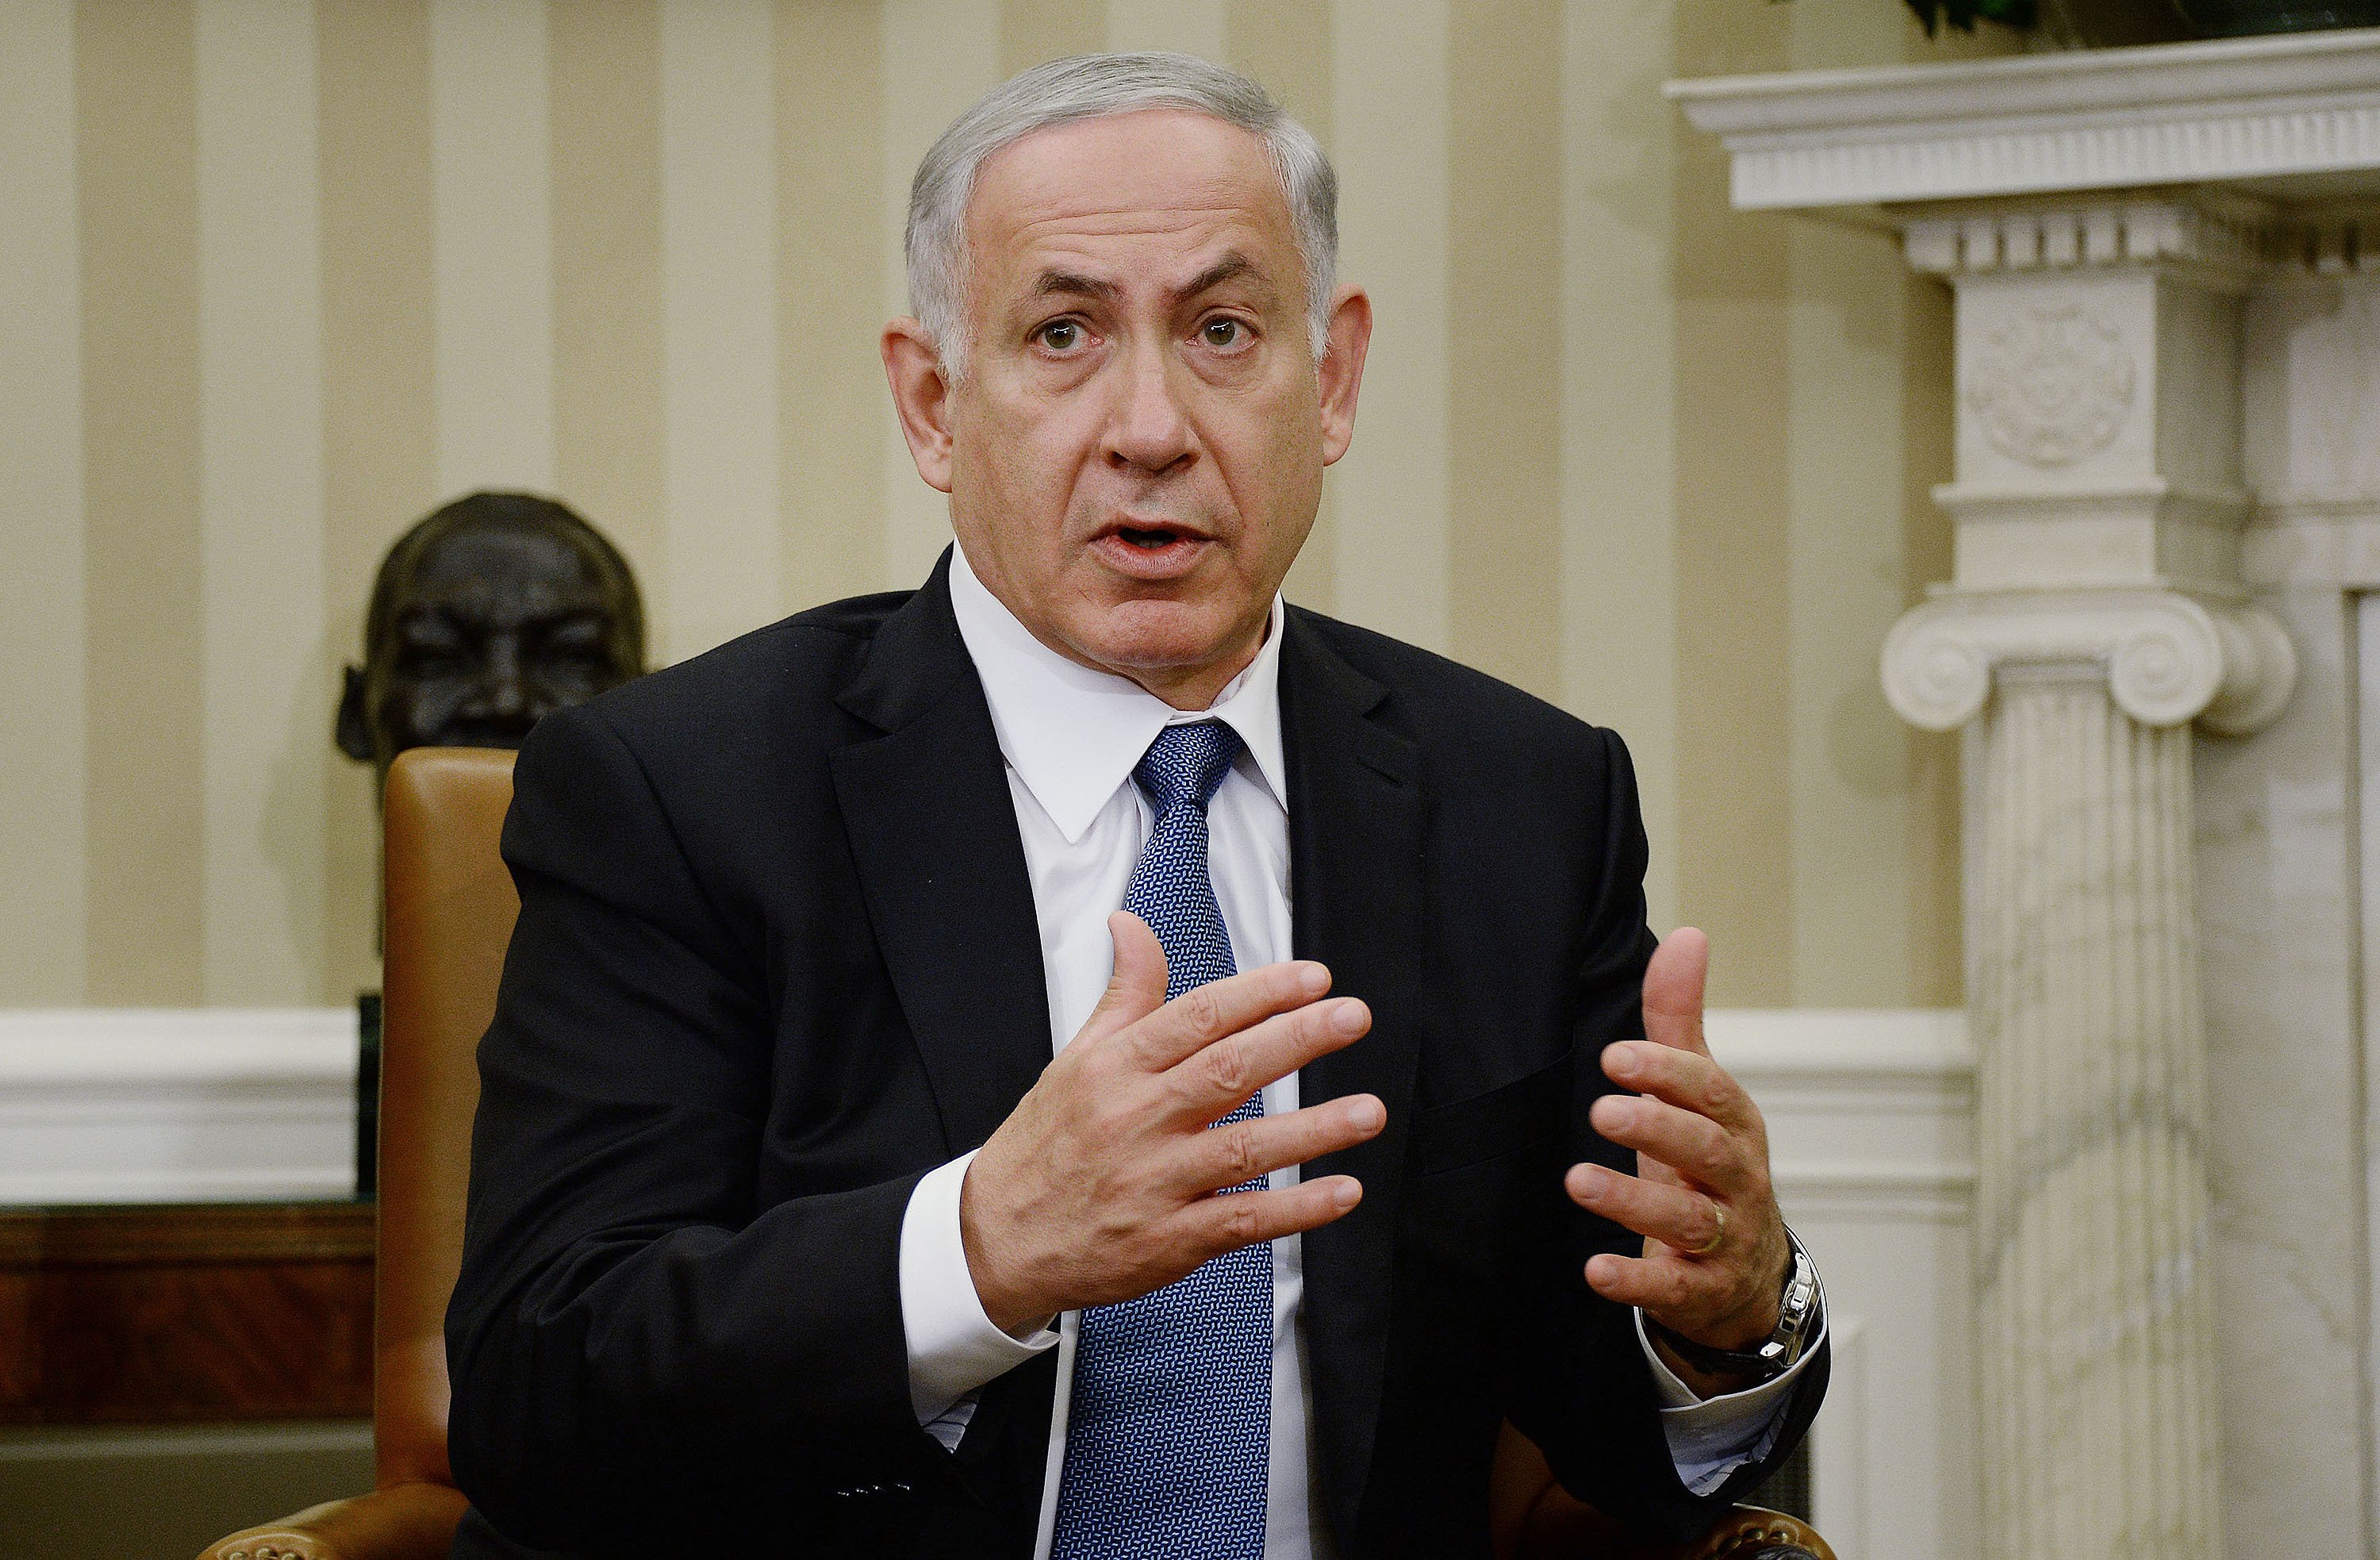 Prime Minister Benjamin Netanyahu of Israel in the Oval Office of the White House on Oct. 1, 2014 in Washington, DC. (Olivier Douliery—Corbis)